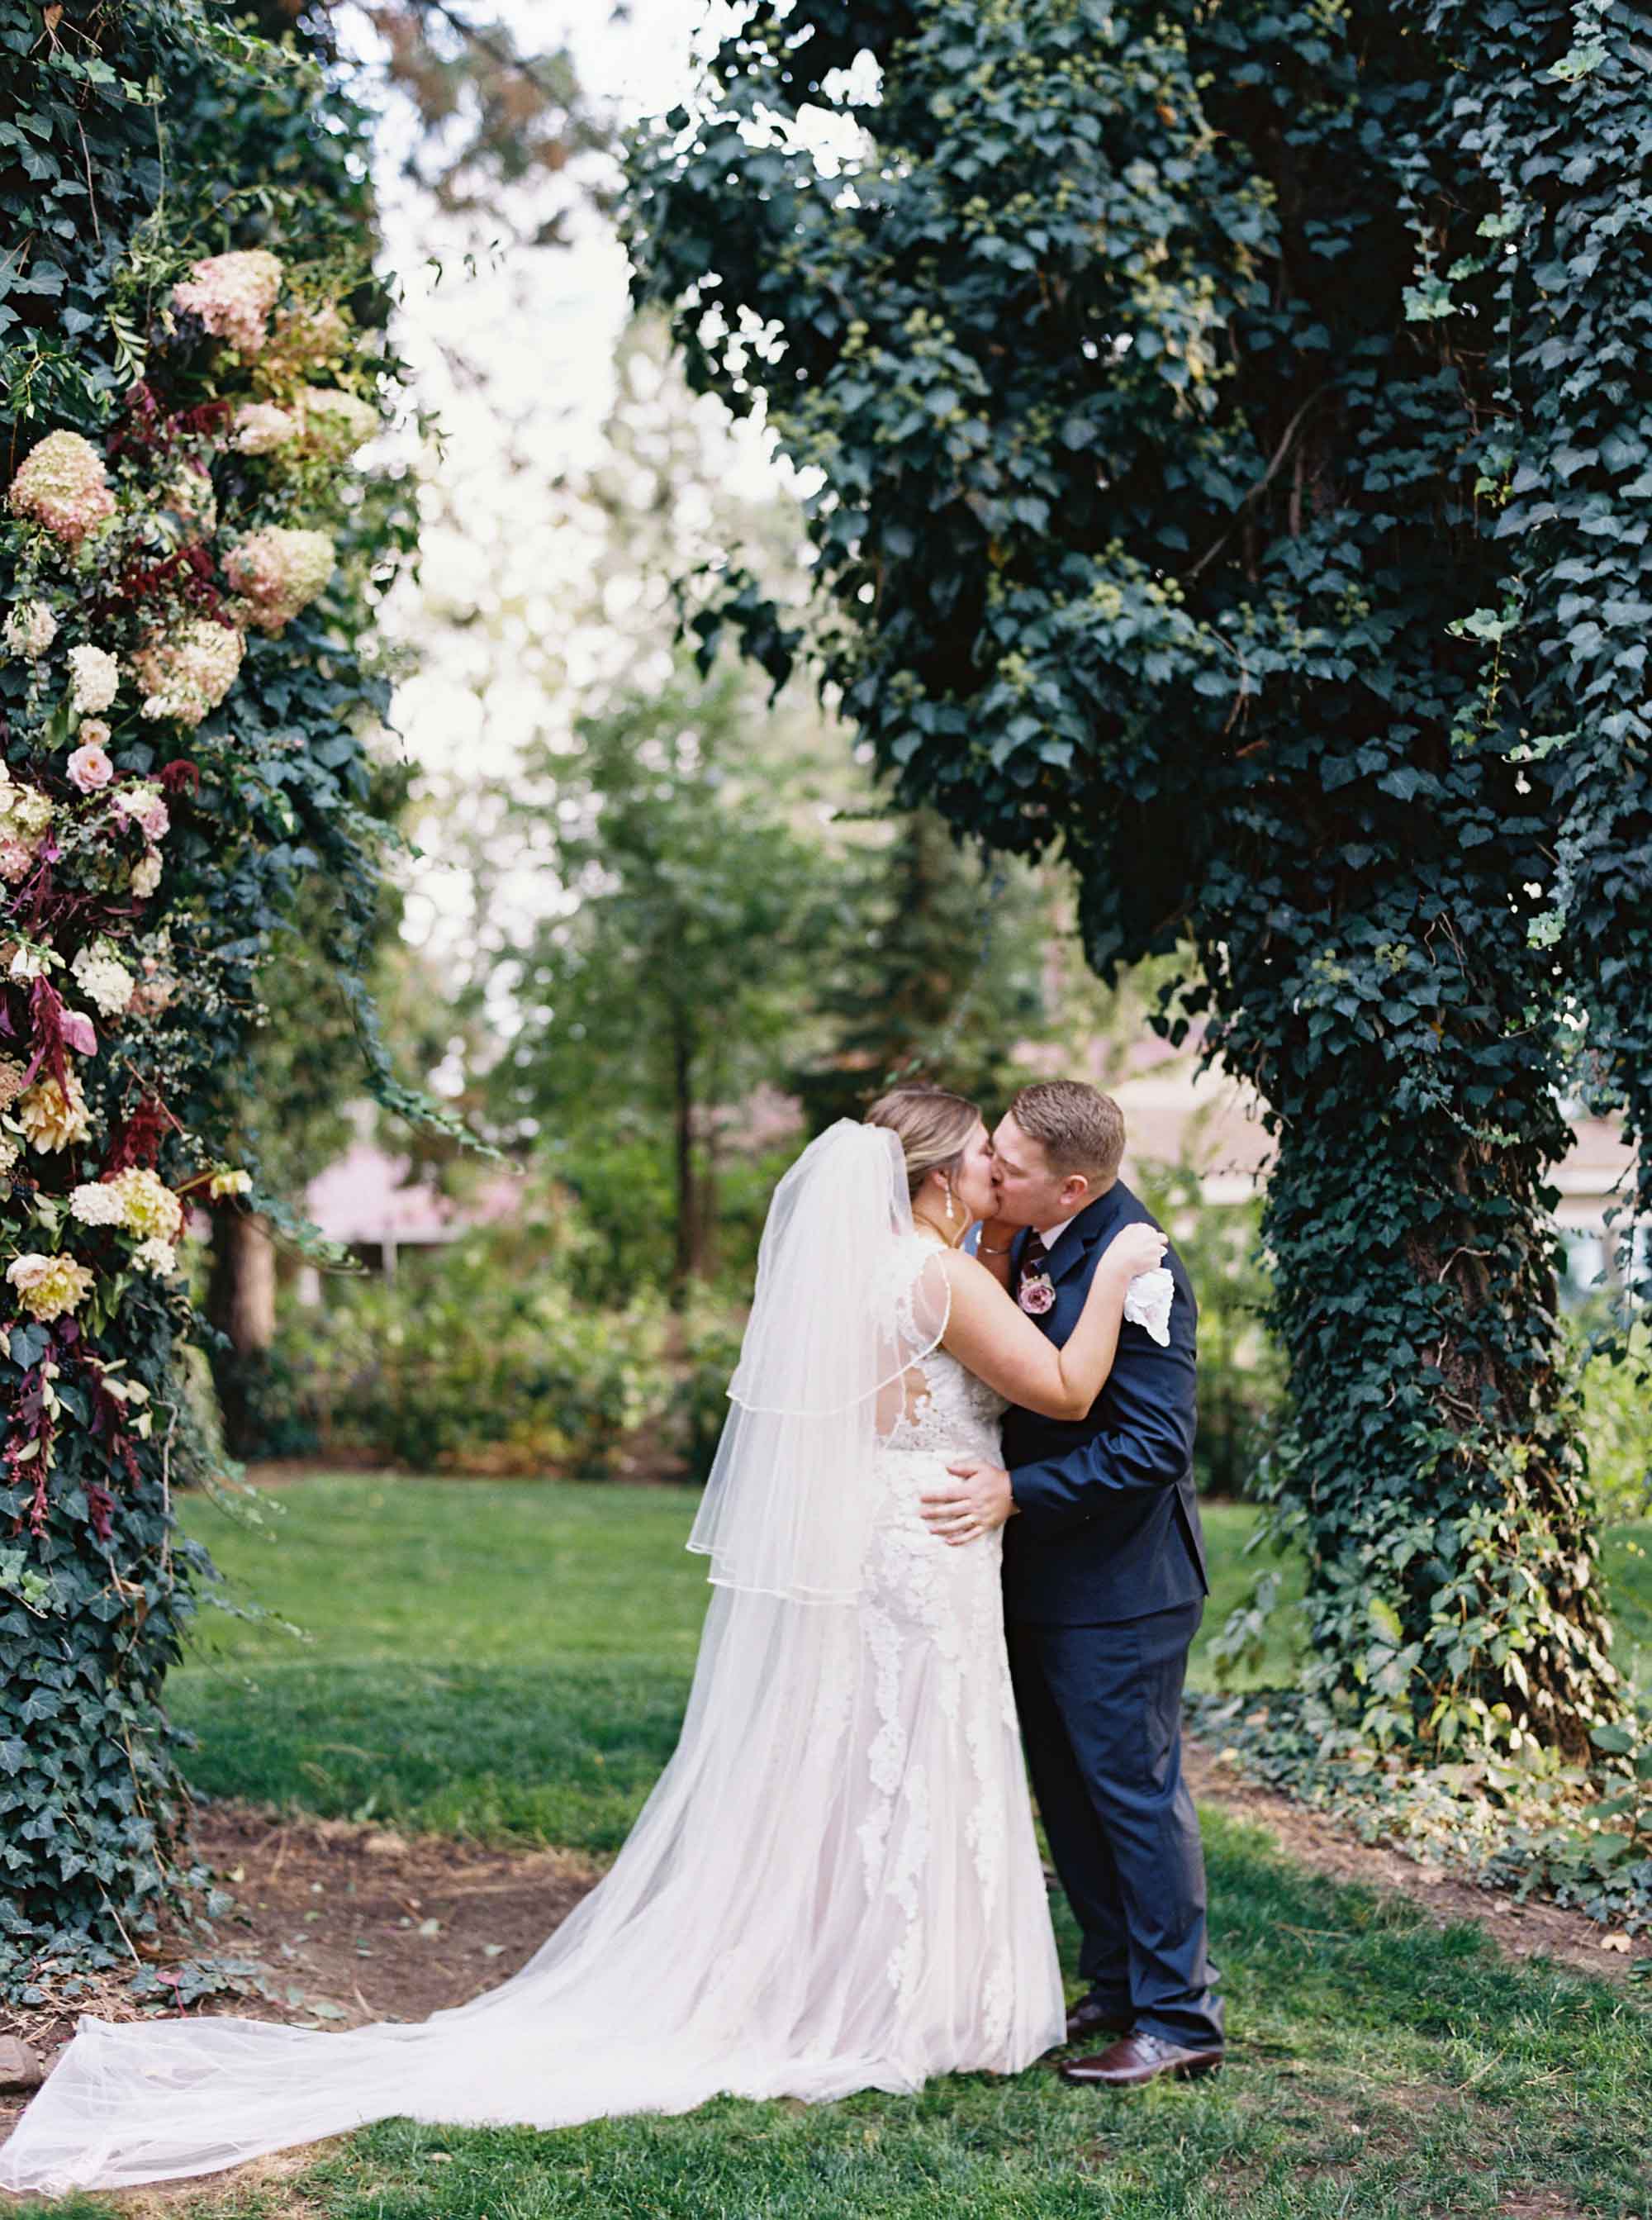 Berry toned, fall wedding with garden inspired floral design at Arbor Crest Winery in Spokane, Washington | Photographed by Seattle and Destination Wedding Photographer Anna Peters